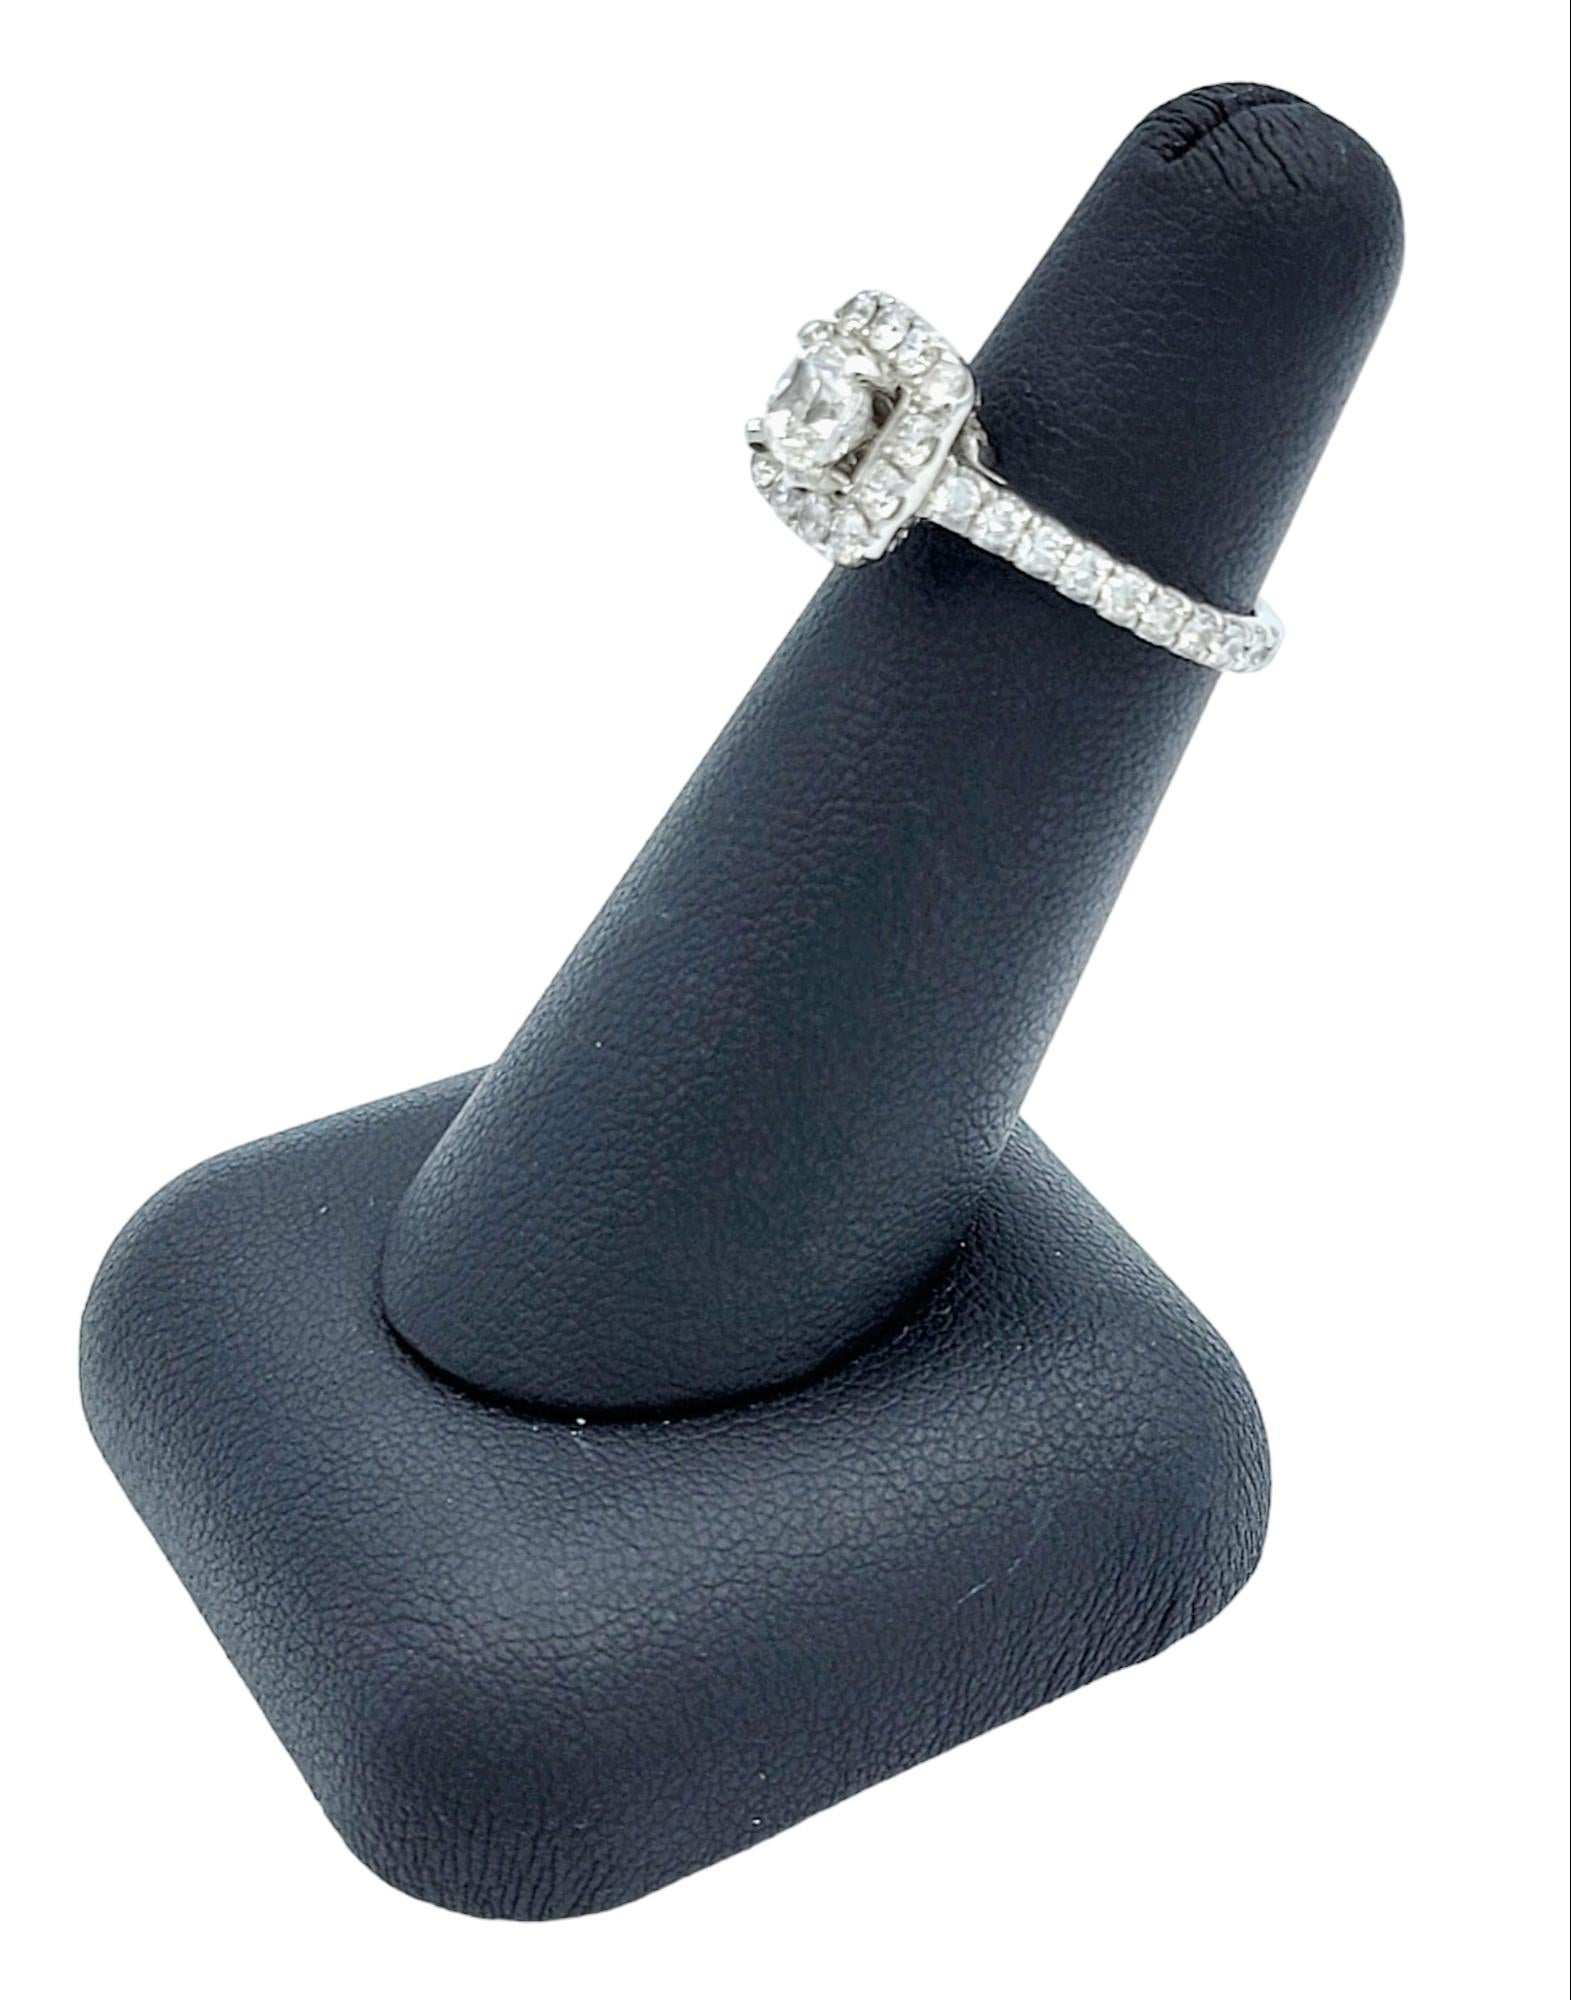 Neil Lane Cushion and Round Diamond Halo Engagement Ring in 14 Karat White Gold For Sale 5